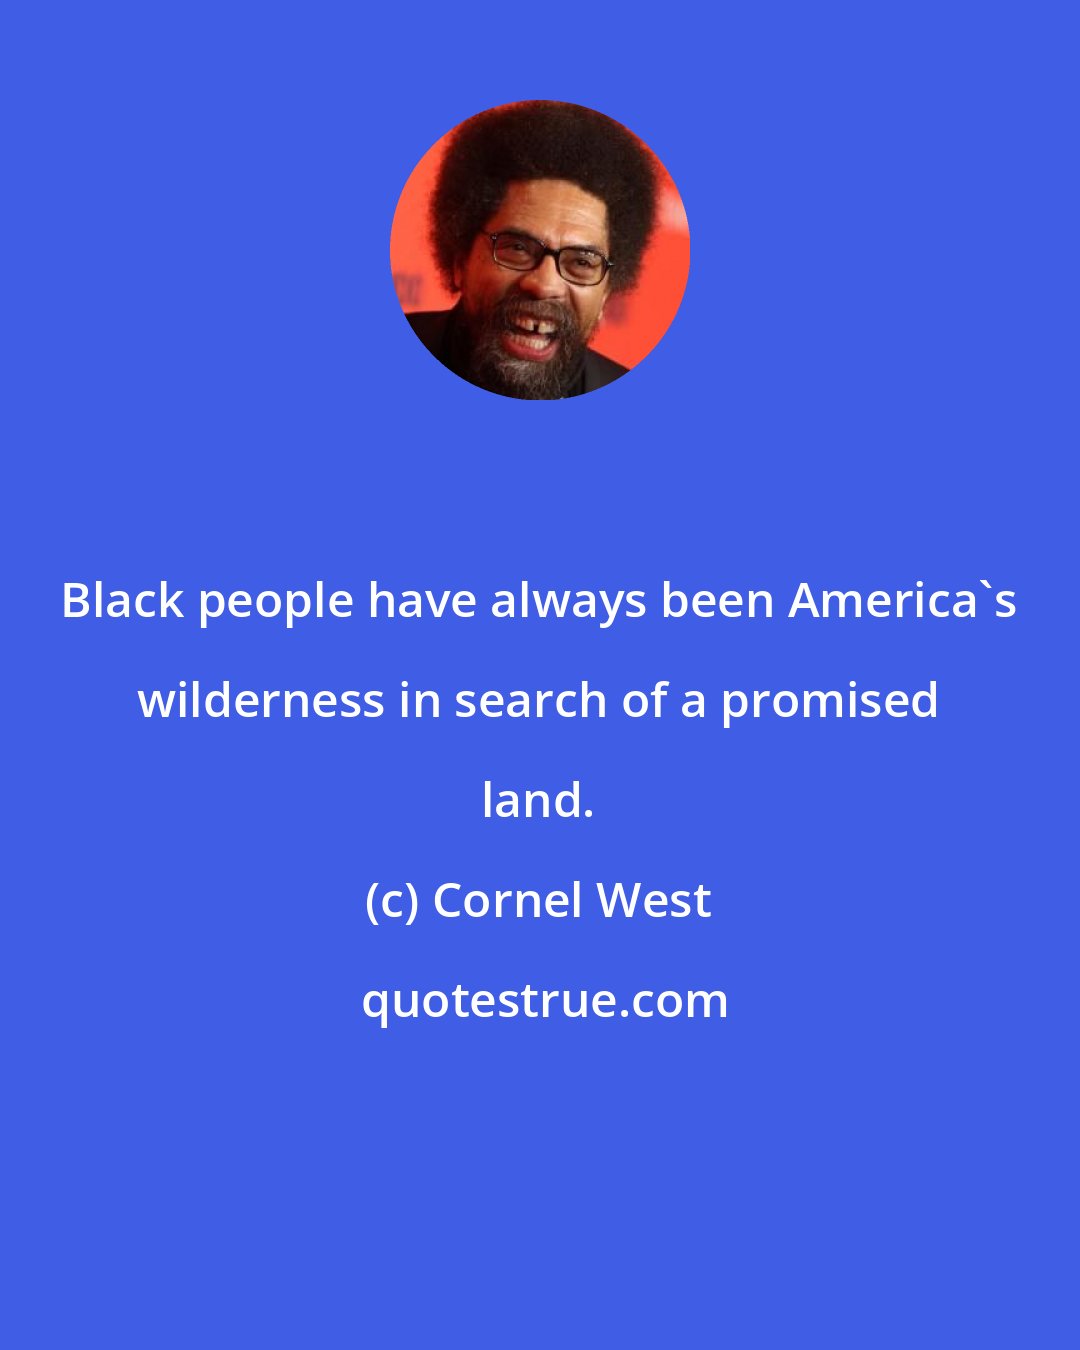 Cornel West: Black people have always been America's wilderness in search of a promised land.